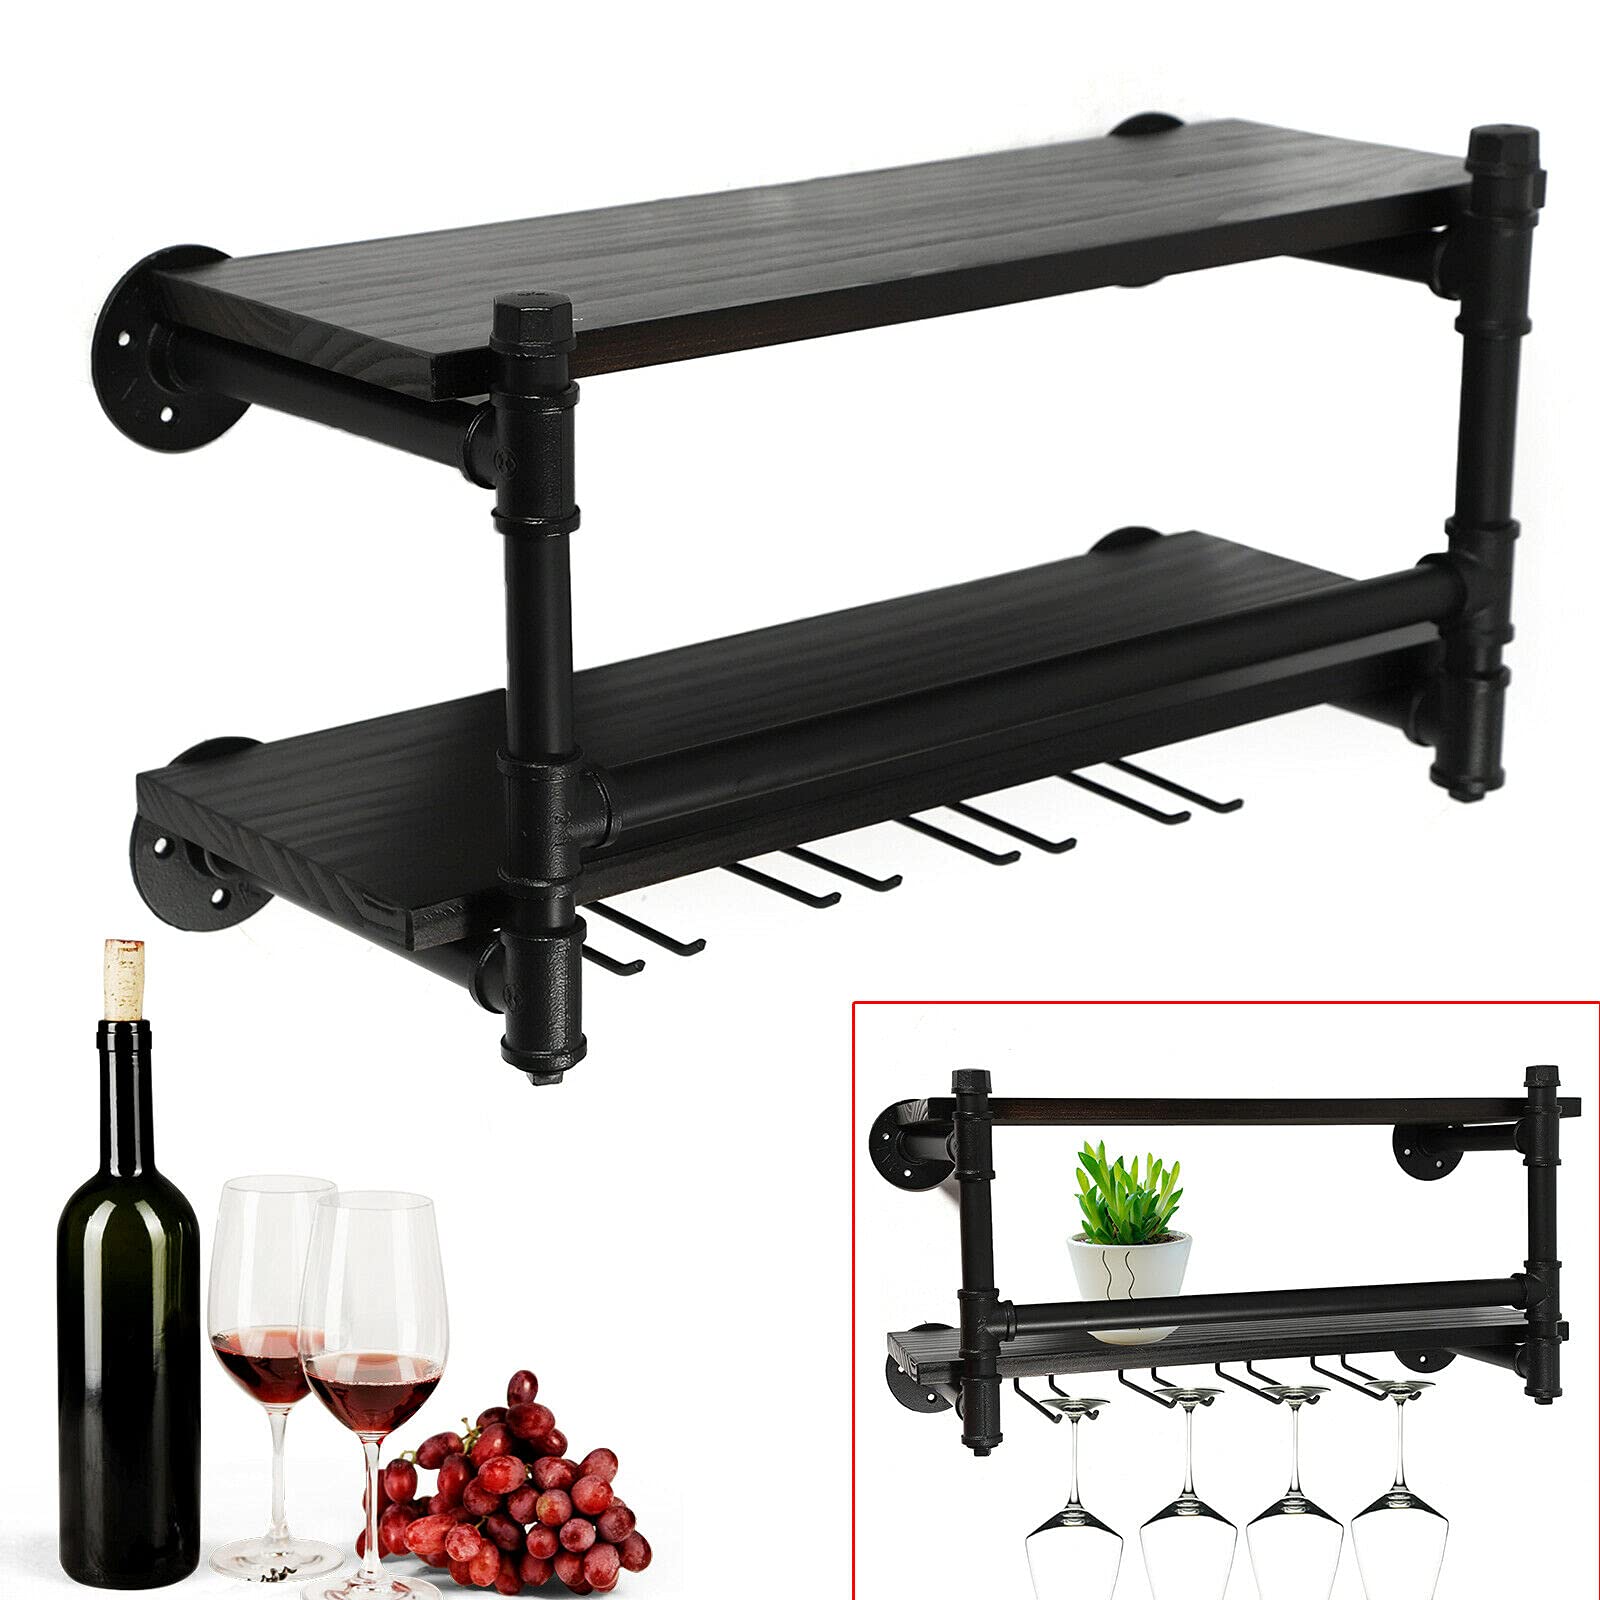 2 Tire Industrial Wall Mounted Wine Rack